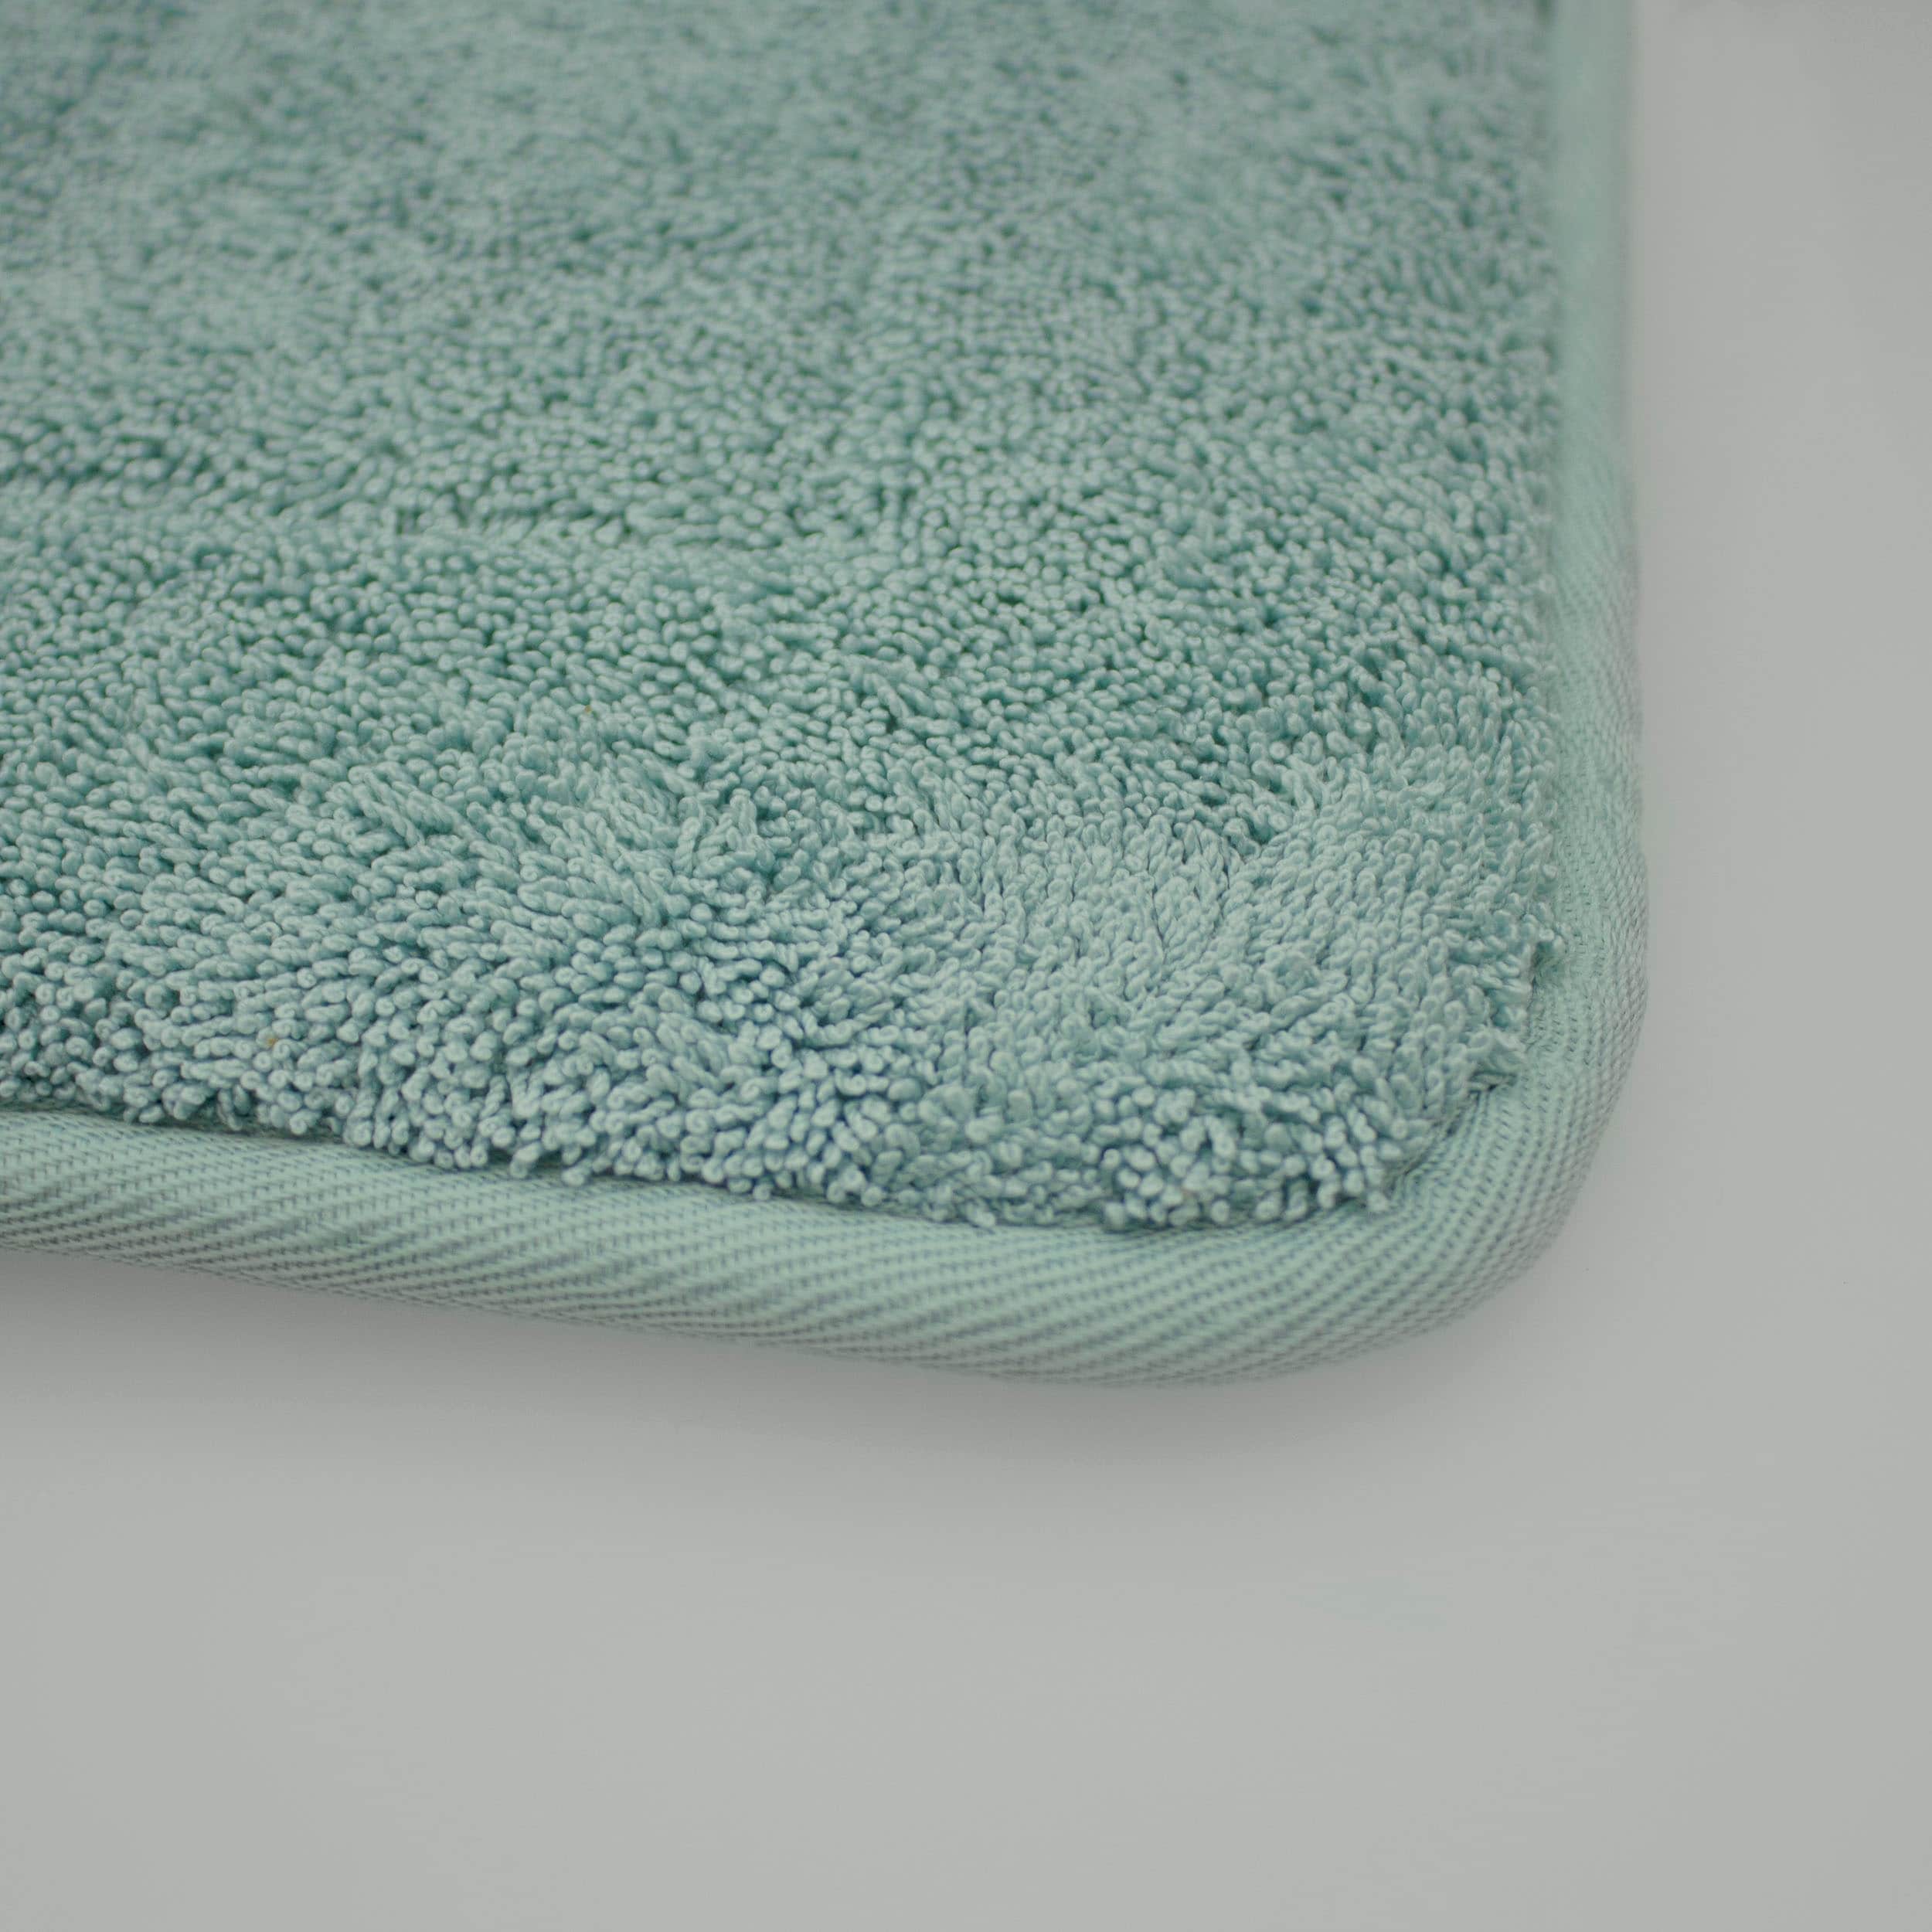 https://ak1.ostkcdn.com/images/products/is/images/direct/26162be355a5087931db898b4fddd86016eeed9c/Oliver-Brown-Terry-Memory-Foam-Bath-Mat.jpg